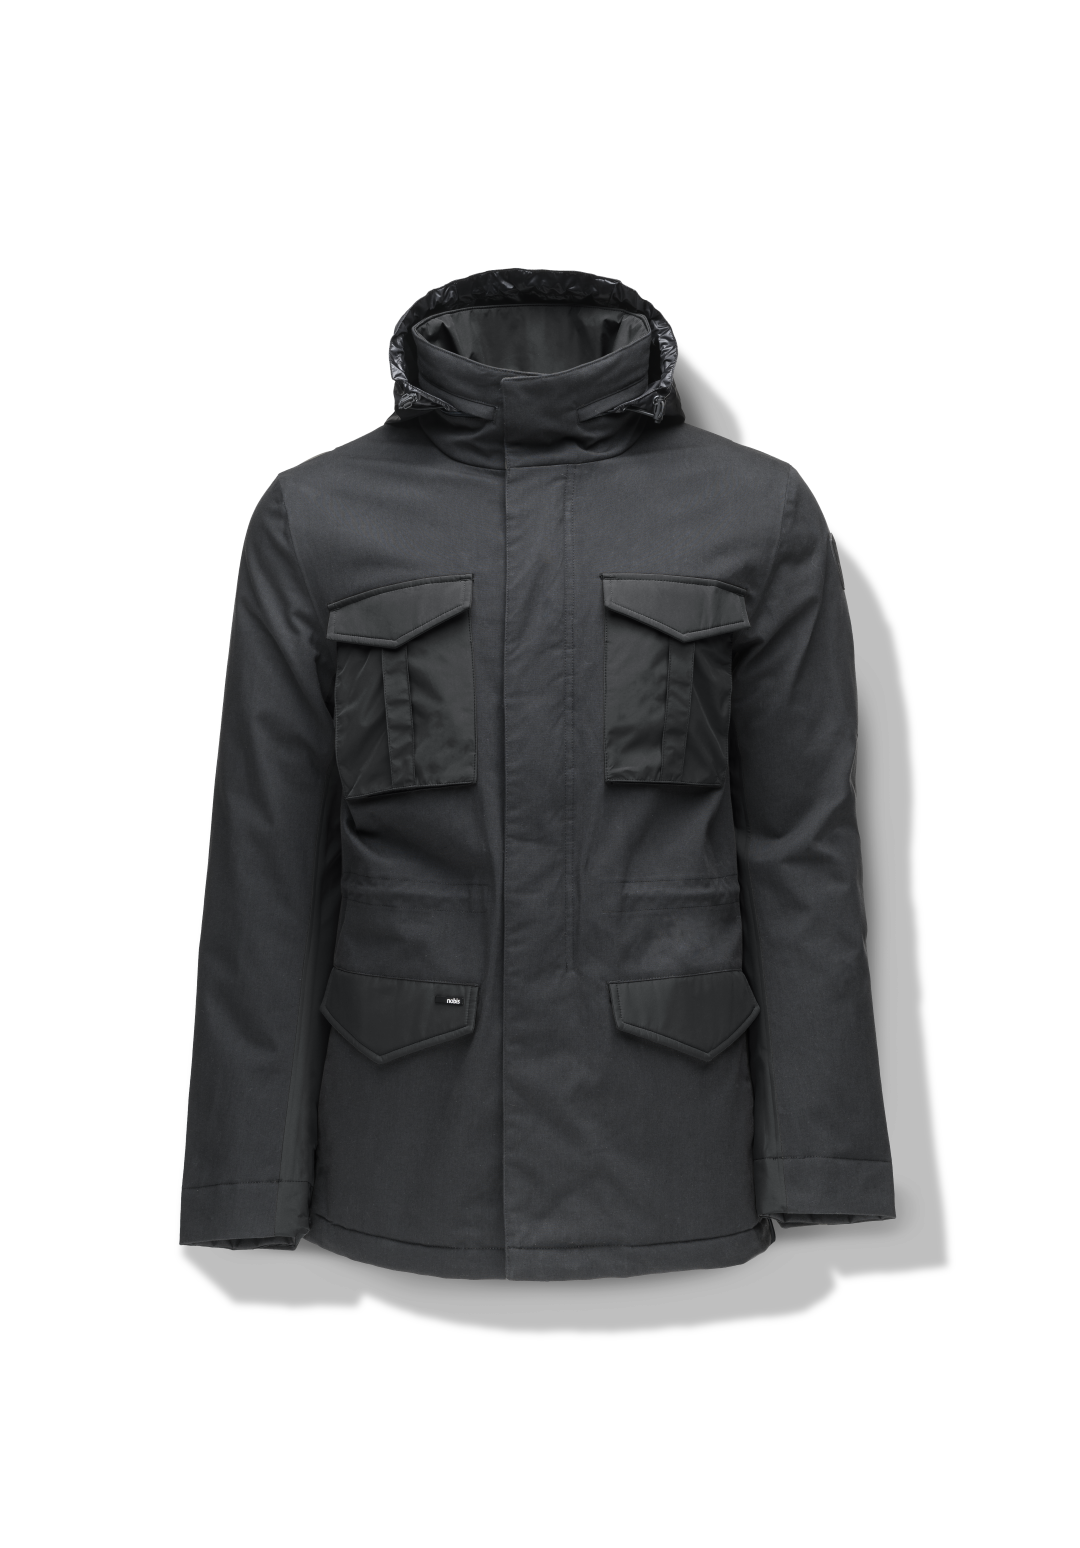 Pelican Men's Tailored Field Jacket in hip length, premium cotton blend and 3-ply micro denier fabrication, Premium Canadian origin White Duck Down insulation, tuck away, waterproof hood in premium cire technical nylon taffeta, two-way centre-front zipper with magnetic wind flap, pit zipper vents, magnetic closure chest and waist flap pockets, hidden adjustable waist drawcord, and action back detailing, in Black